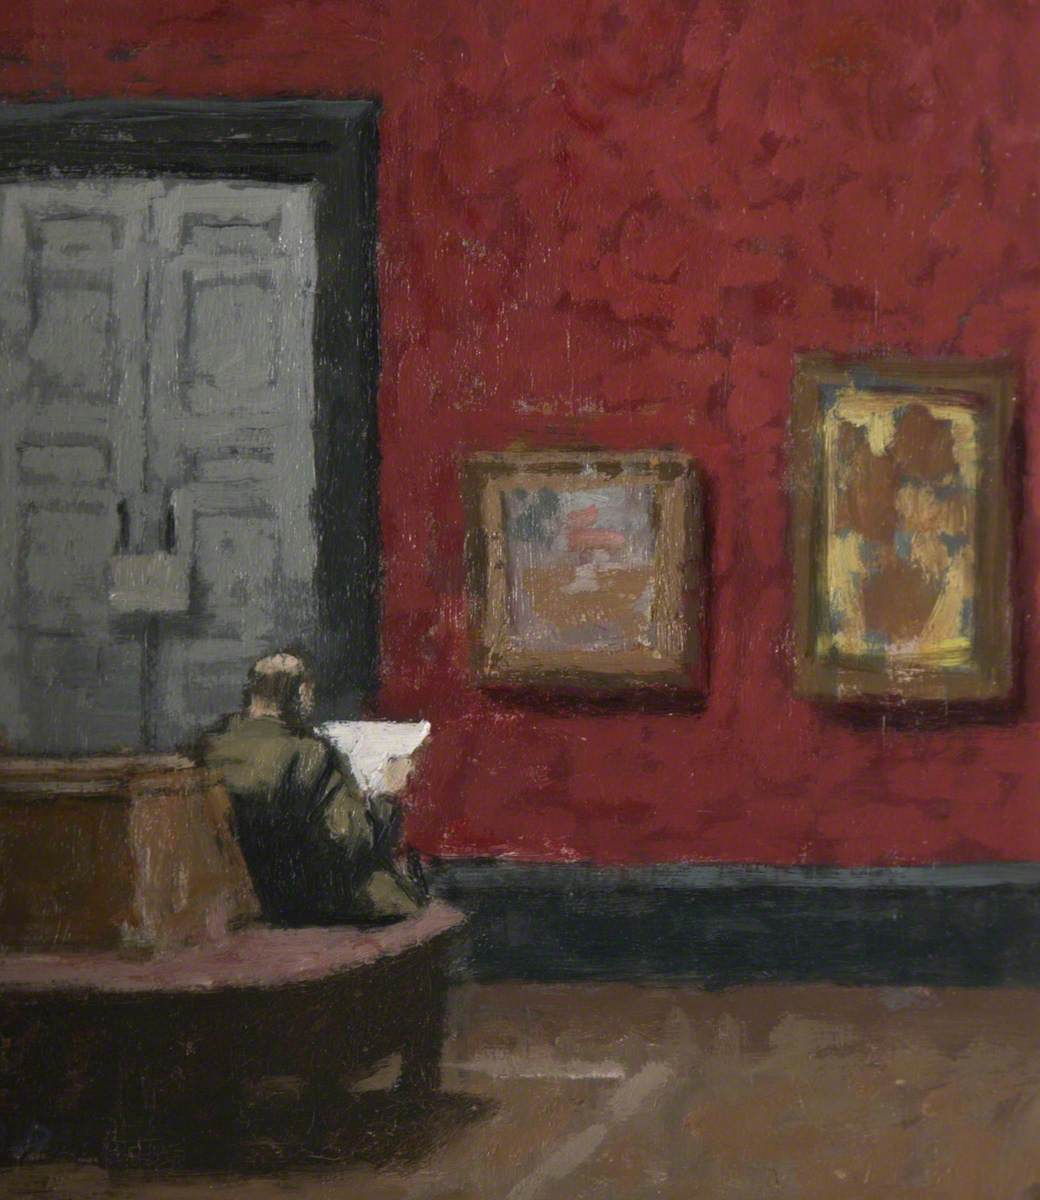 This year marks the @NationalGallery 's bicentenary ✨🖼✨ We're marking the occasion for @artukdotorg 's #OnlineArtExchange with this oil painting by Bernard Dunstan of the gallery in the 1950s. 🎨 National Gallery (1958) by Bernard Dunstan Credit: @theboxplymouth #NG200